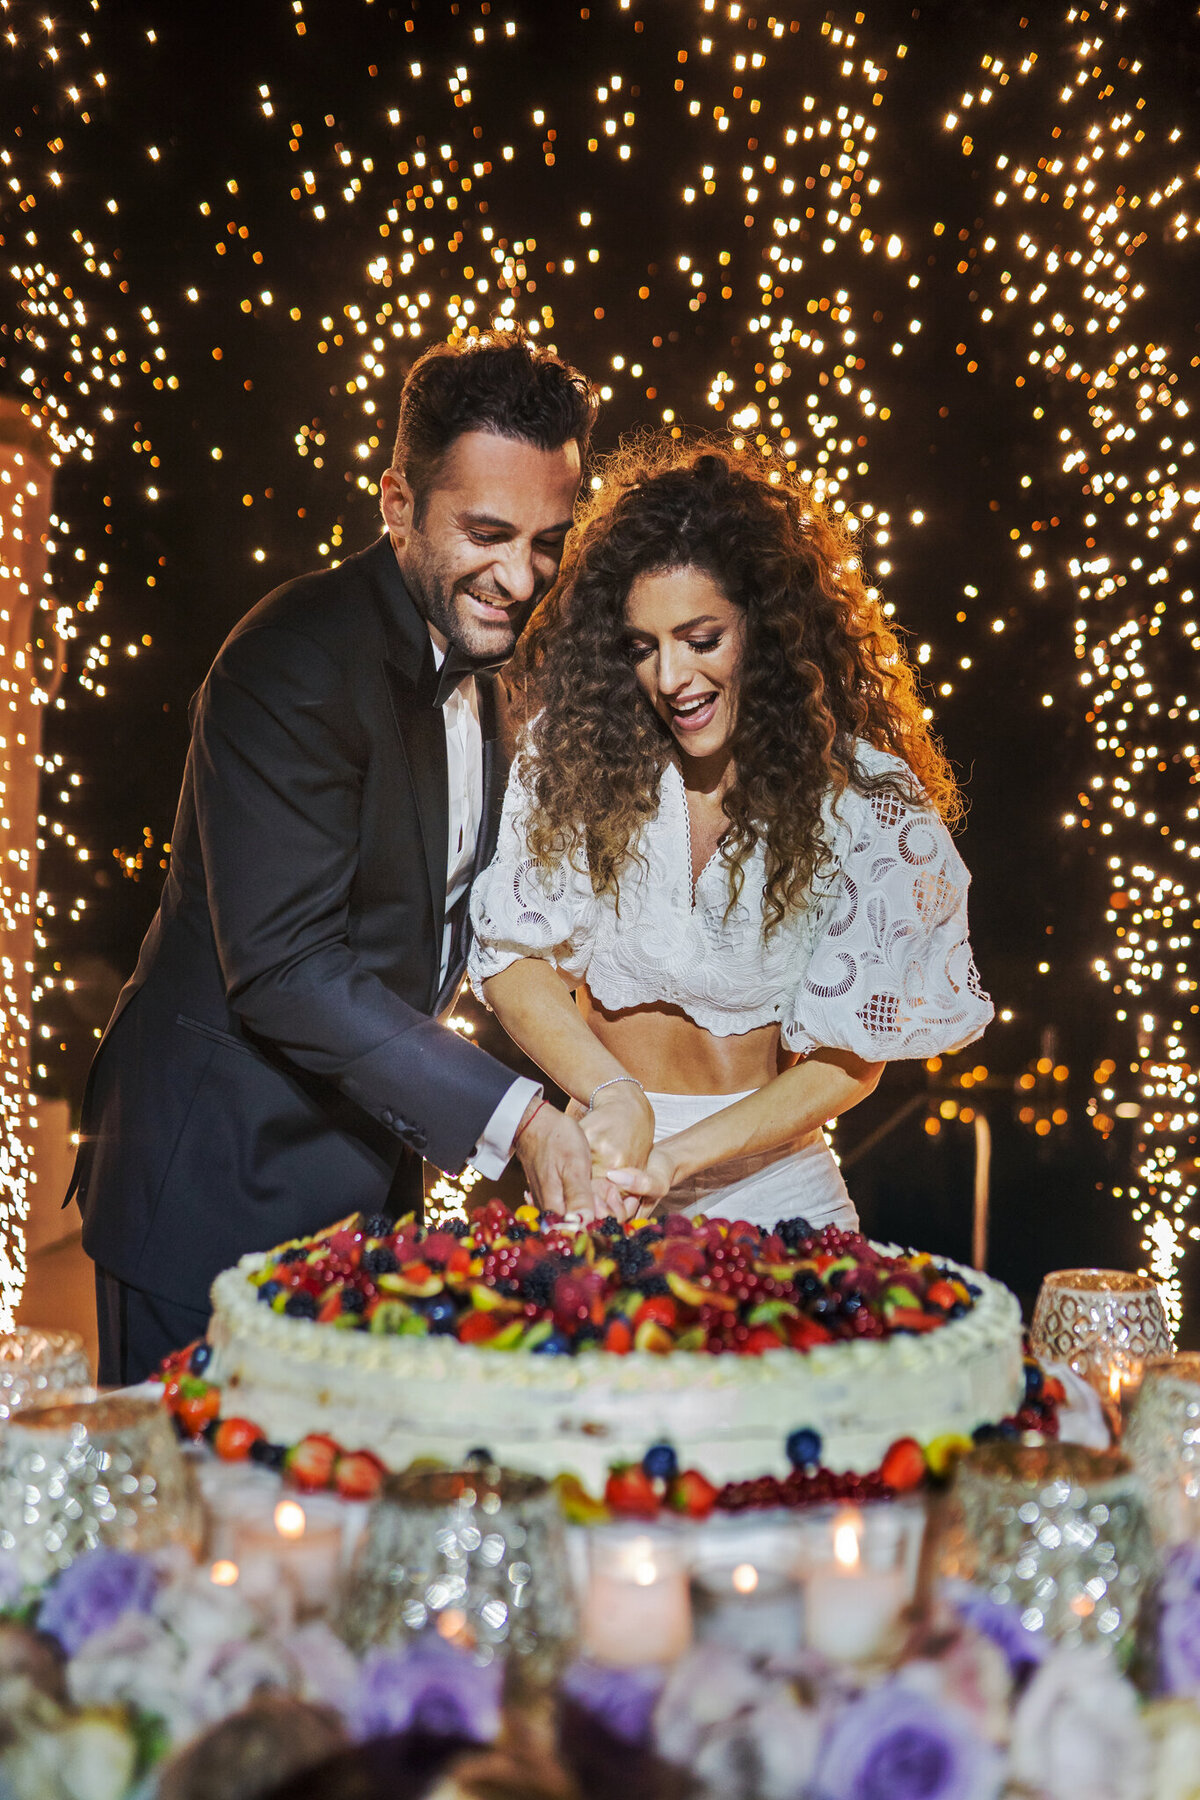 Cake cutting moment with wedding fireworks